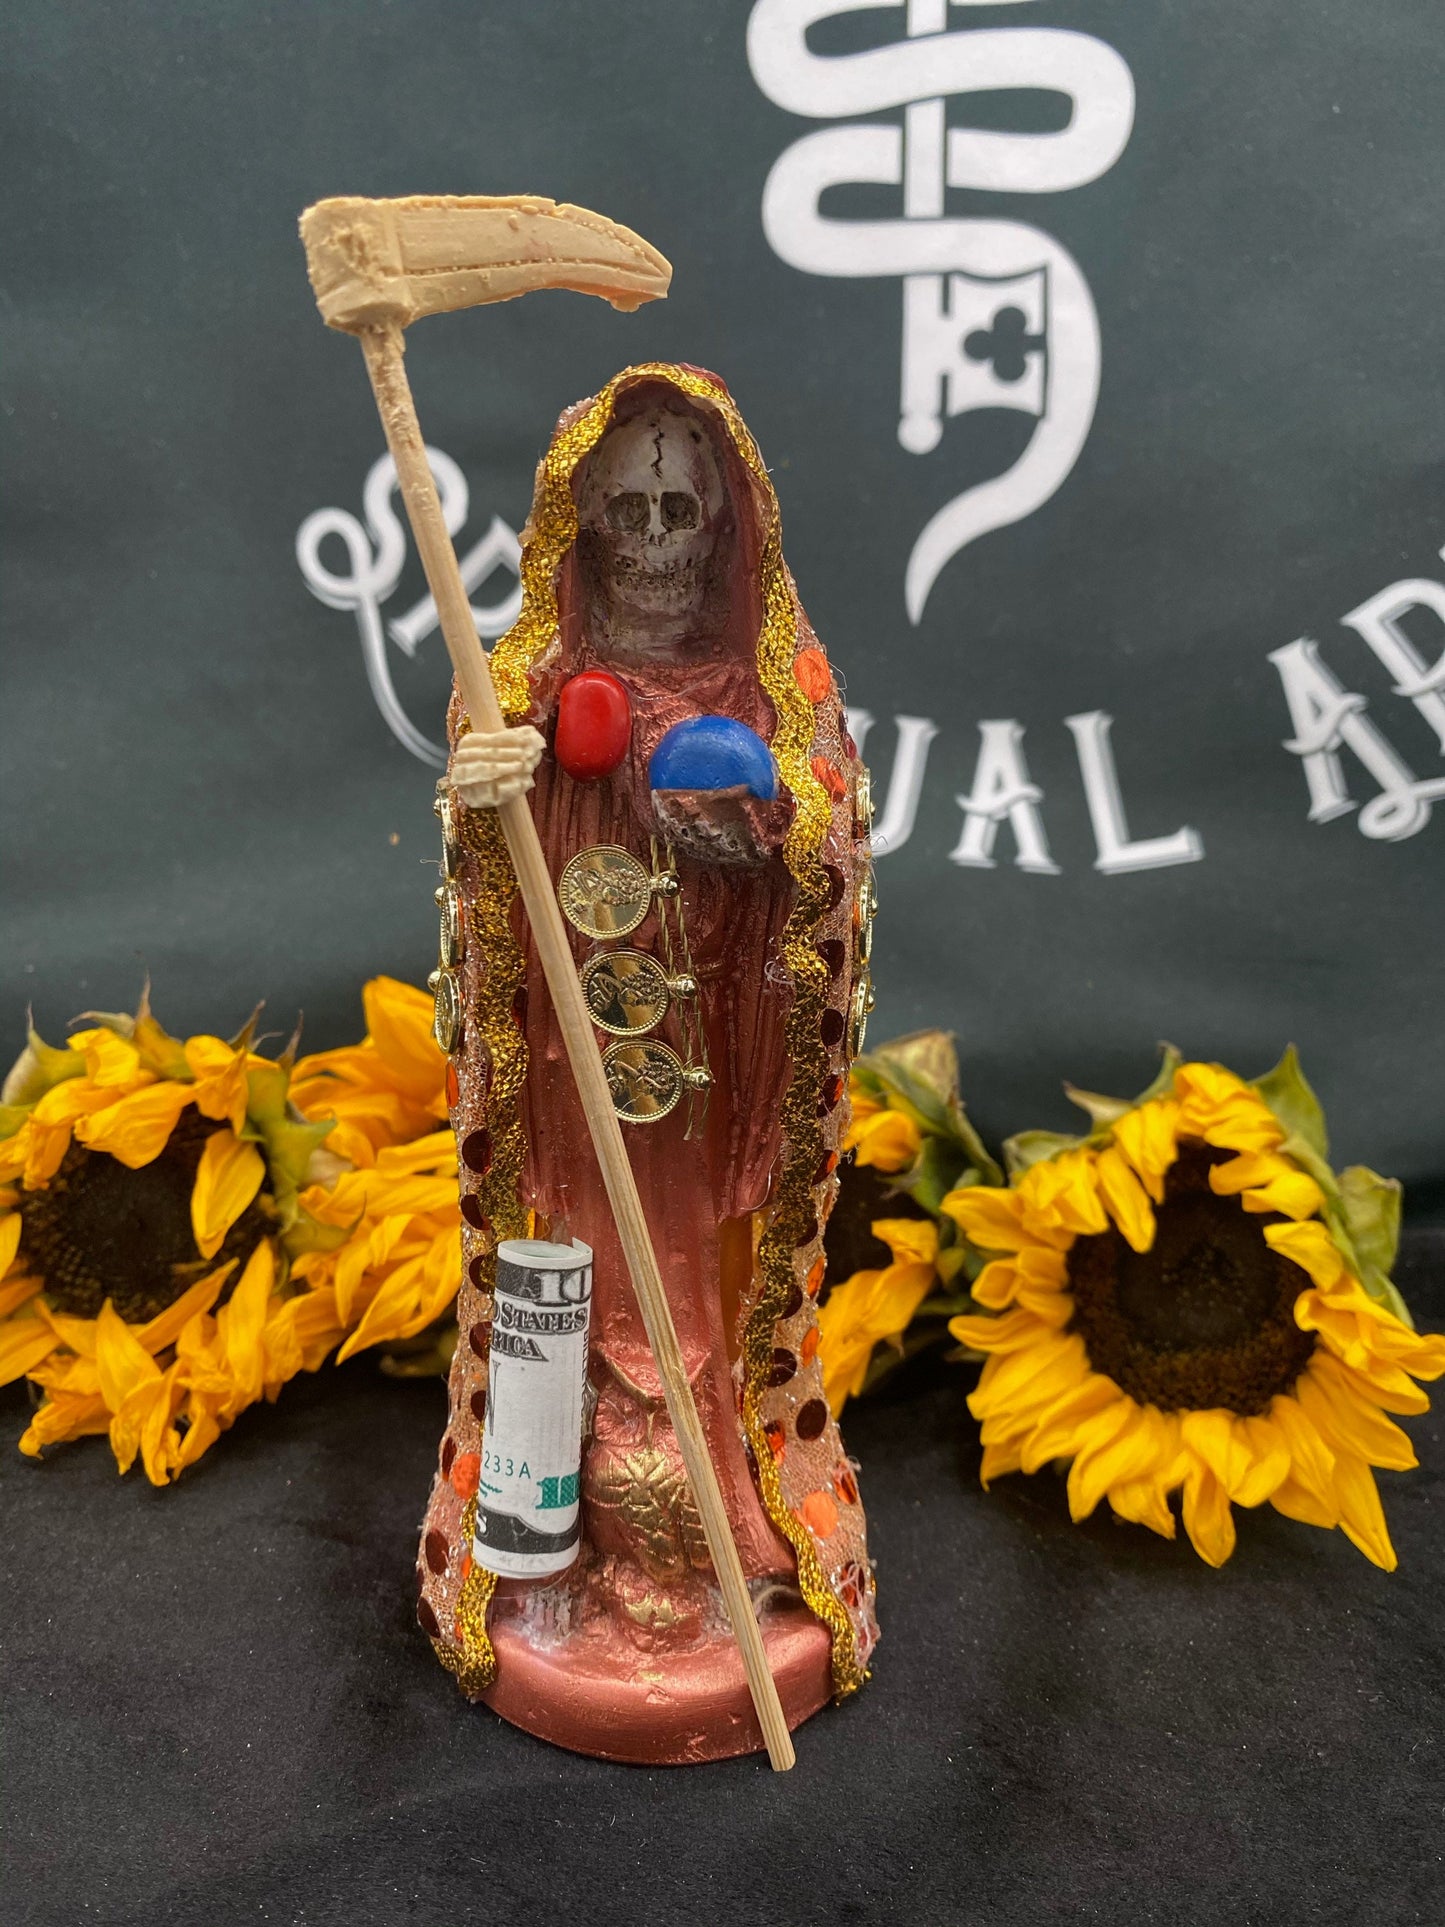 Deluxe Santa Muerte Statue + 24K Gold + 7” + Baptized + Fixed + Made in Mexico